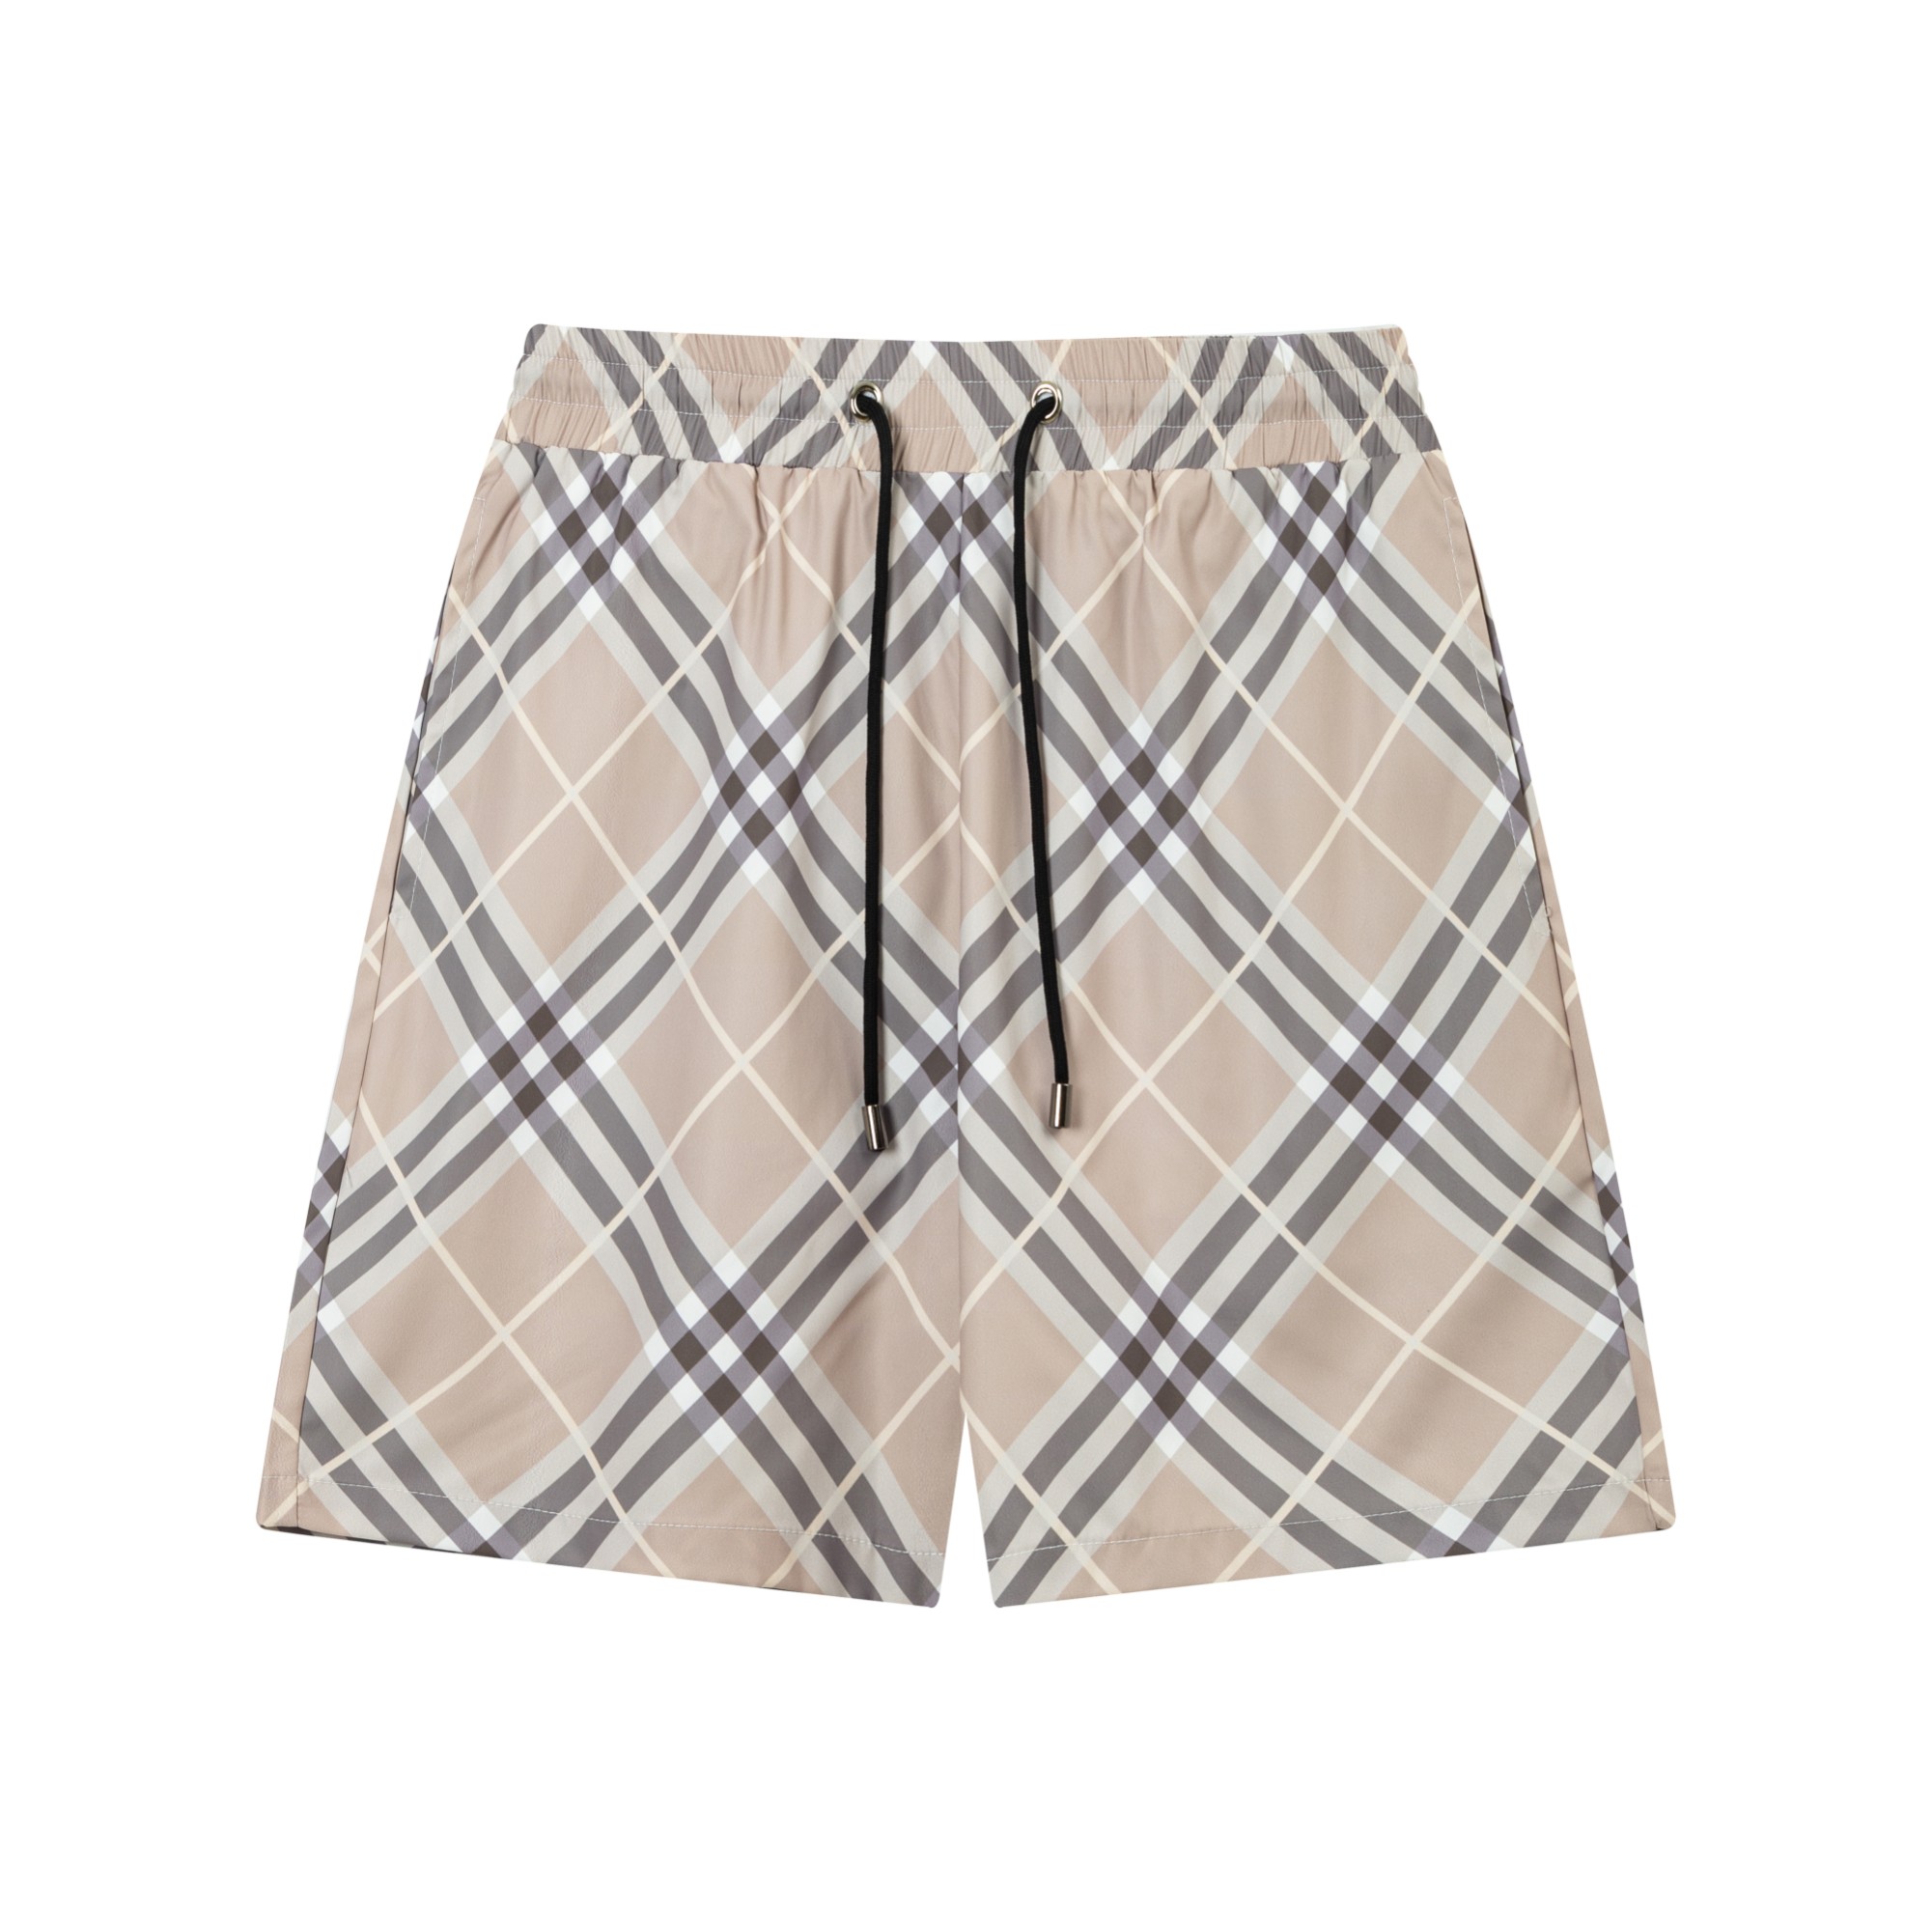 Burberry Top
 Clothing Shorts Polyester Summer Collection Fashion Beach